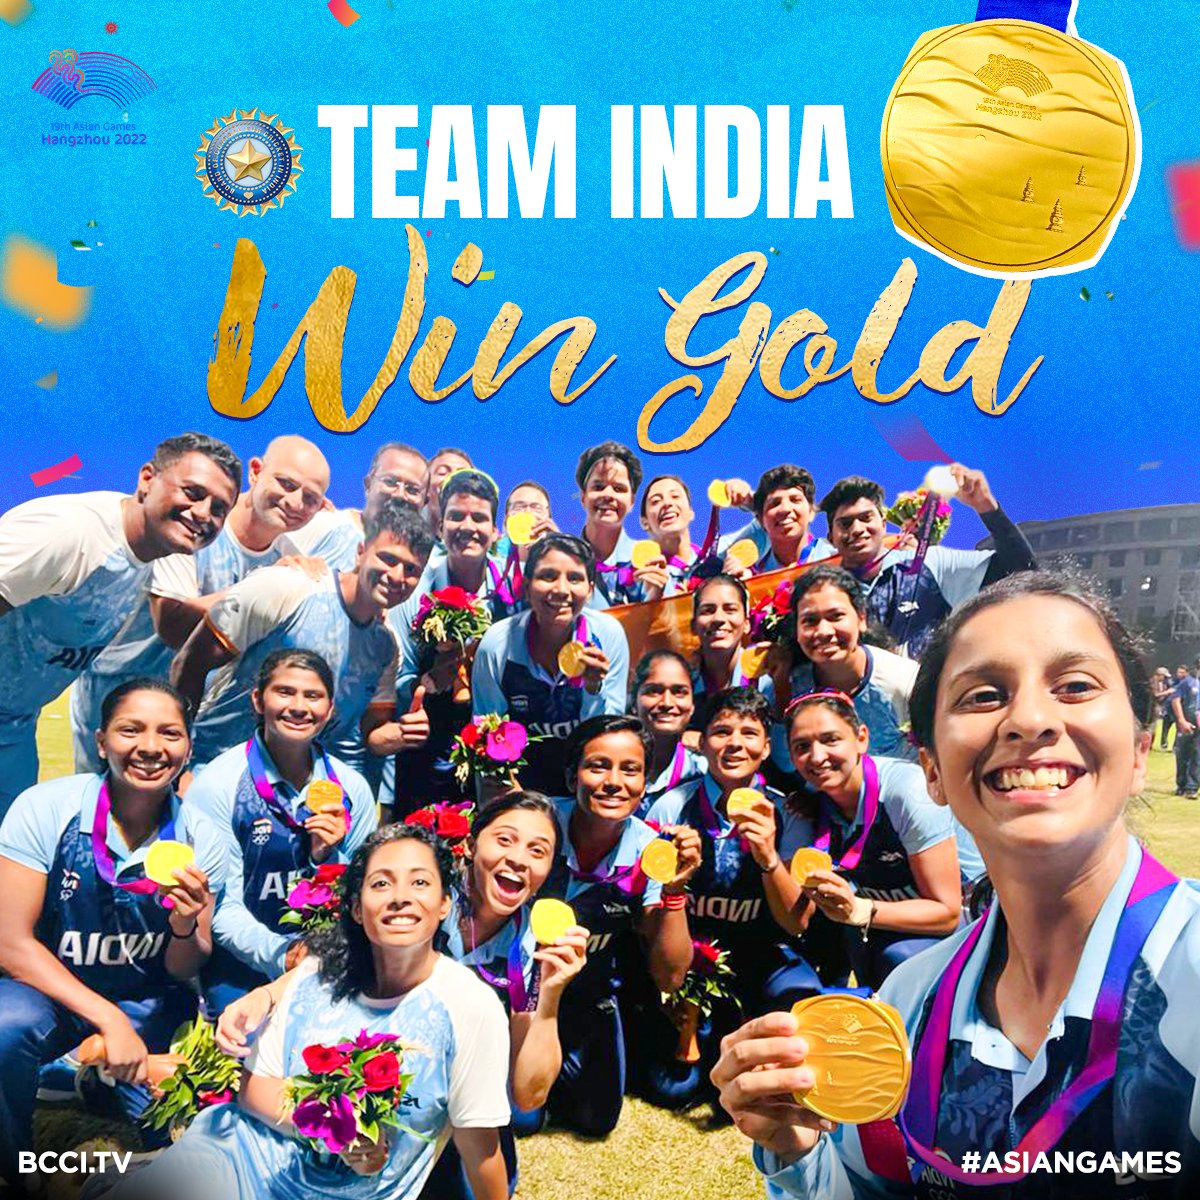 A historic selfie with the 𝙂𝙊𝙇𝘿 𝙈𝙀𝘿𝘼𝙇𝙇𝙄𝙎𝙏𝙎 #TeamIndia | #AsianGames | #IndiaAtAG22